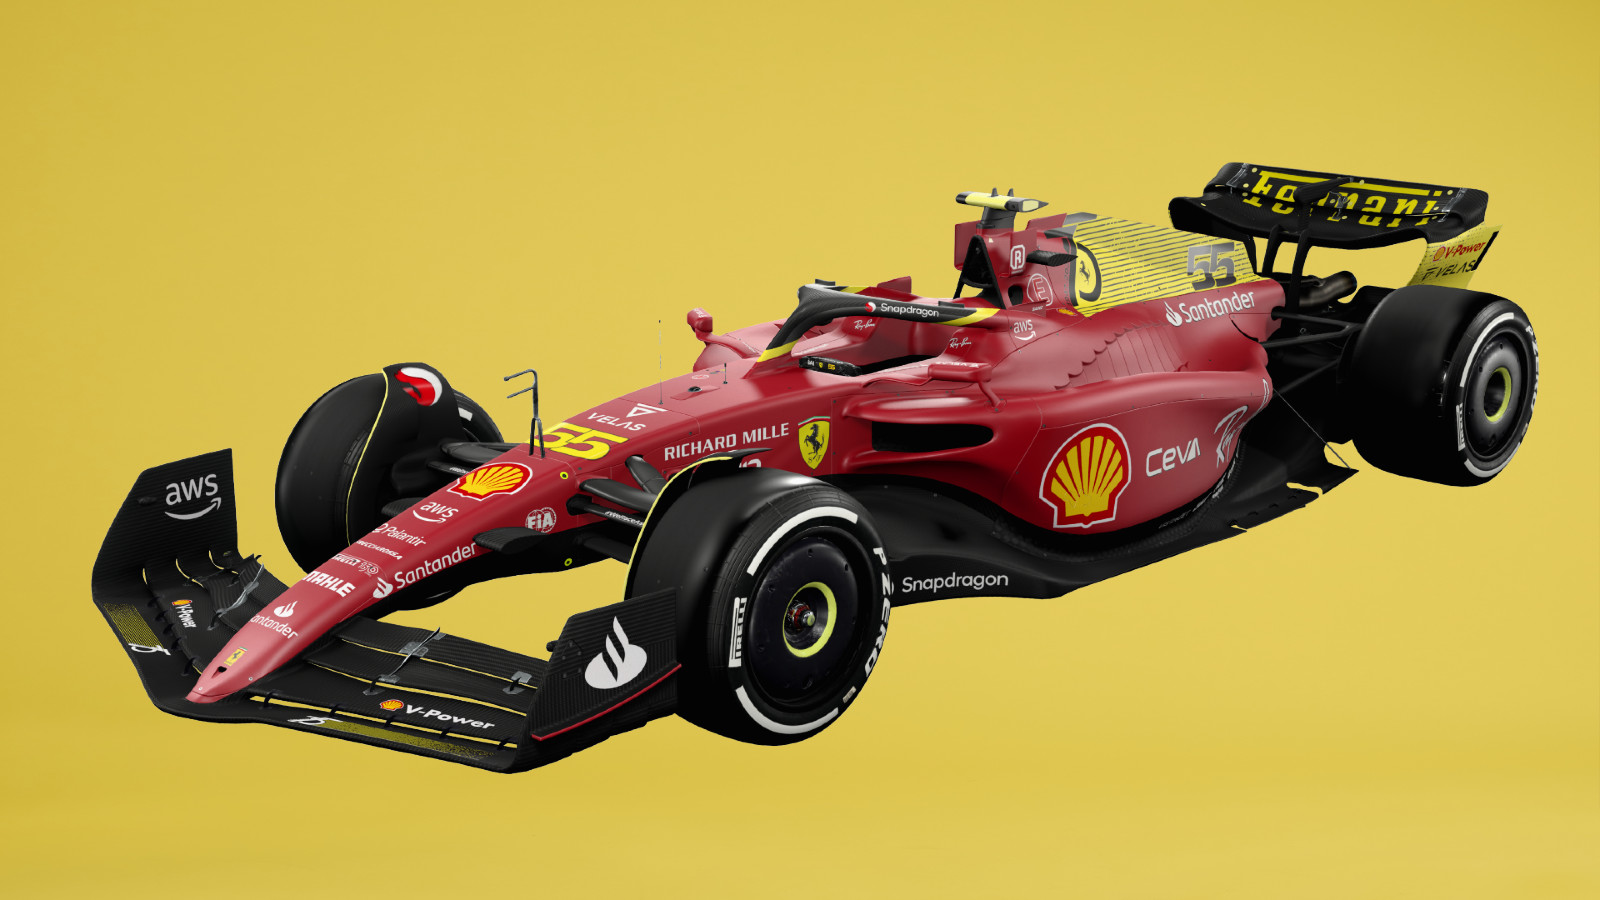 Ferrari's F1-75 in a yellow-tweaked livery for the Italian Grand Prix. Monza, September 2022.